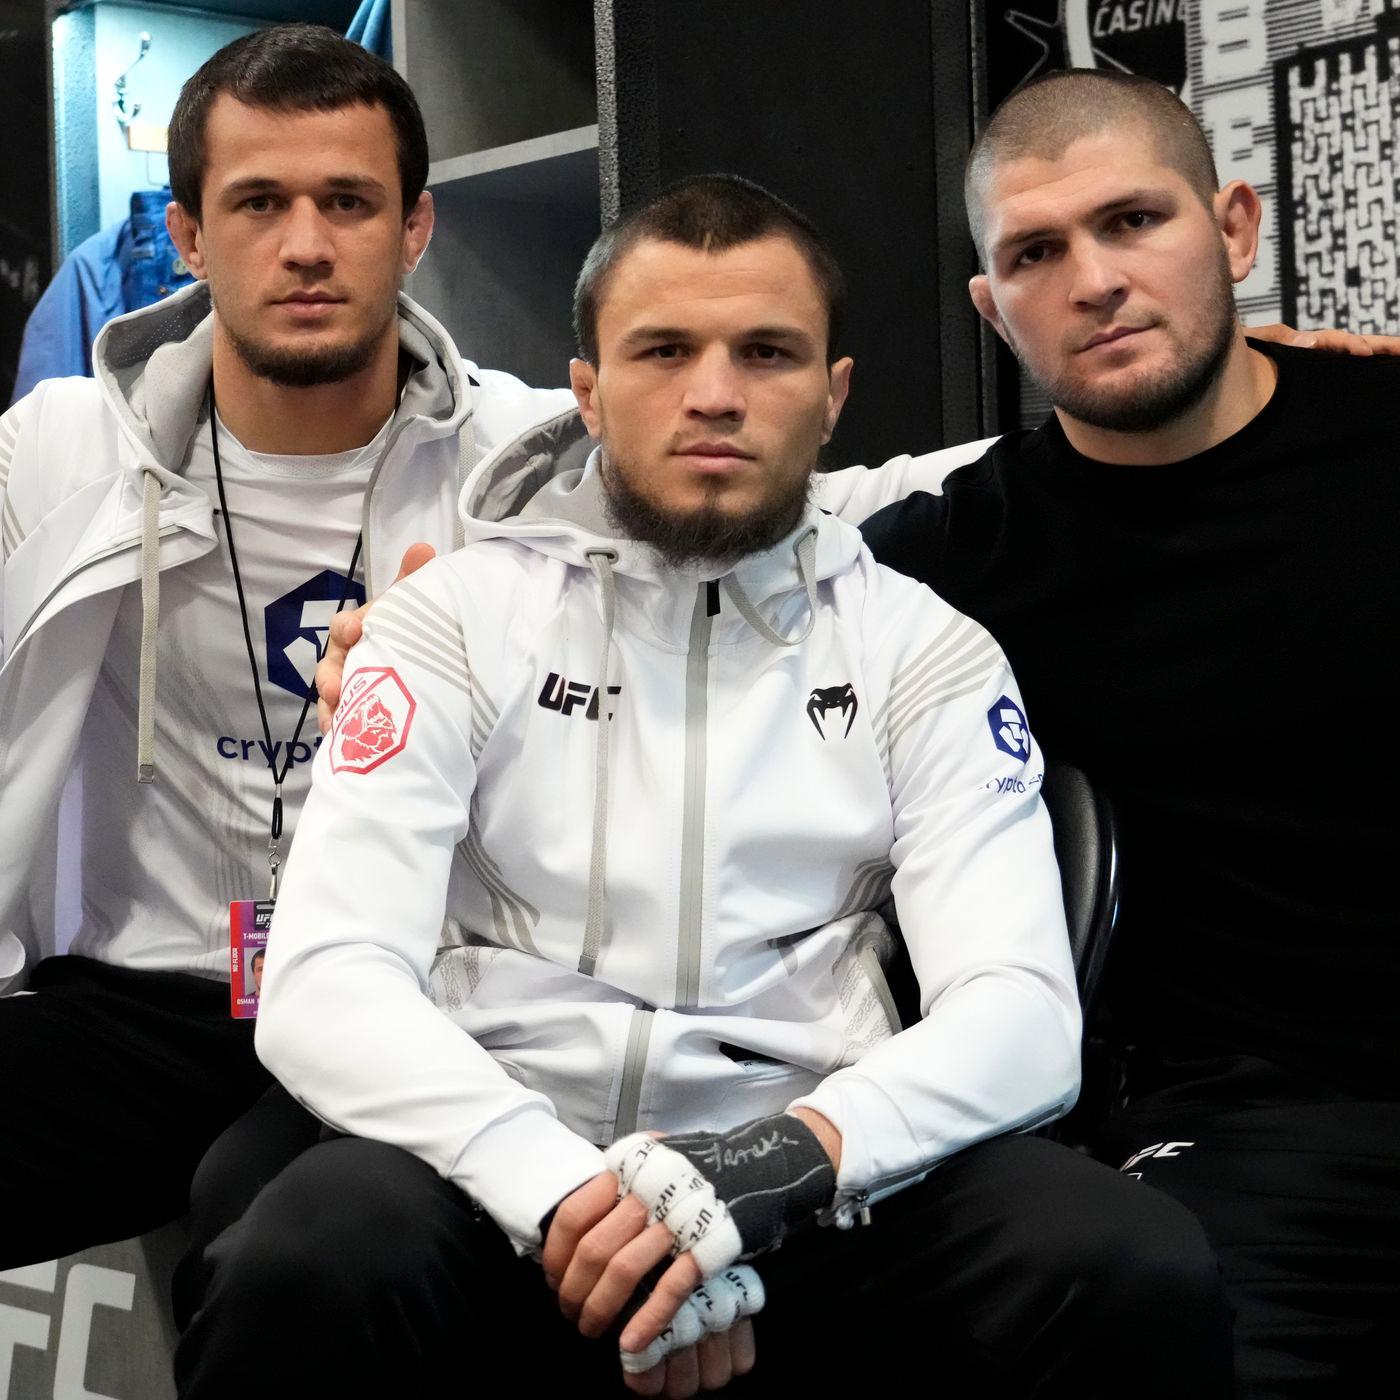 Usman (left) and Umar (middle) Nurmagomedov are doing well to carry their family legacy. Photo by Mike Roach, Zuffa LLC.